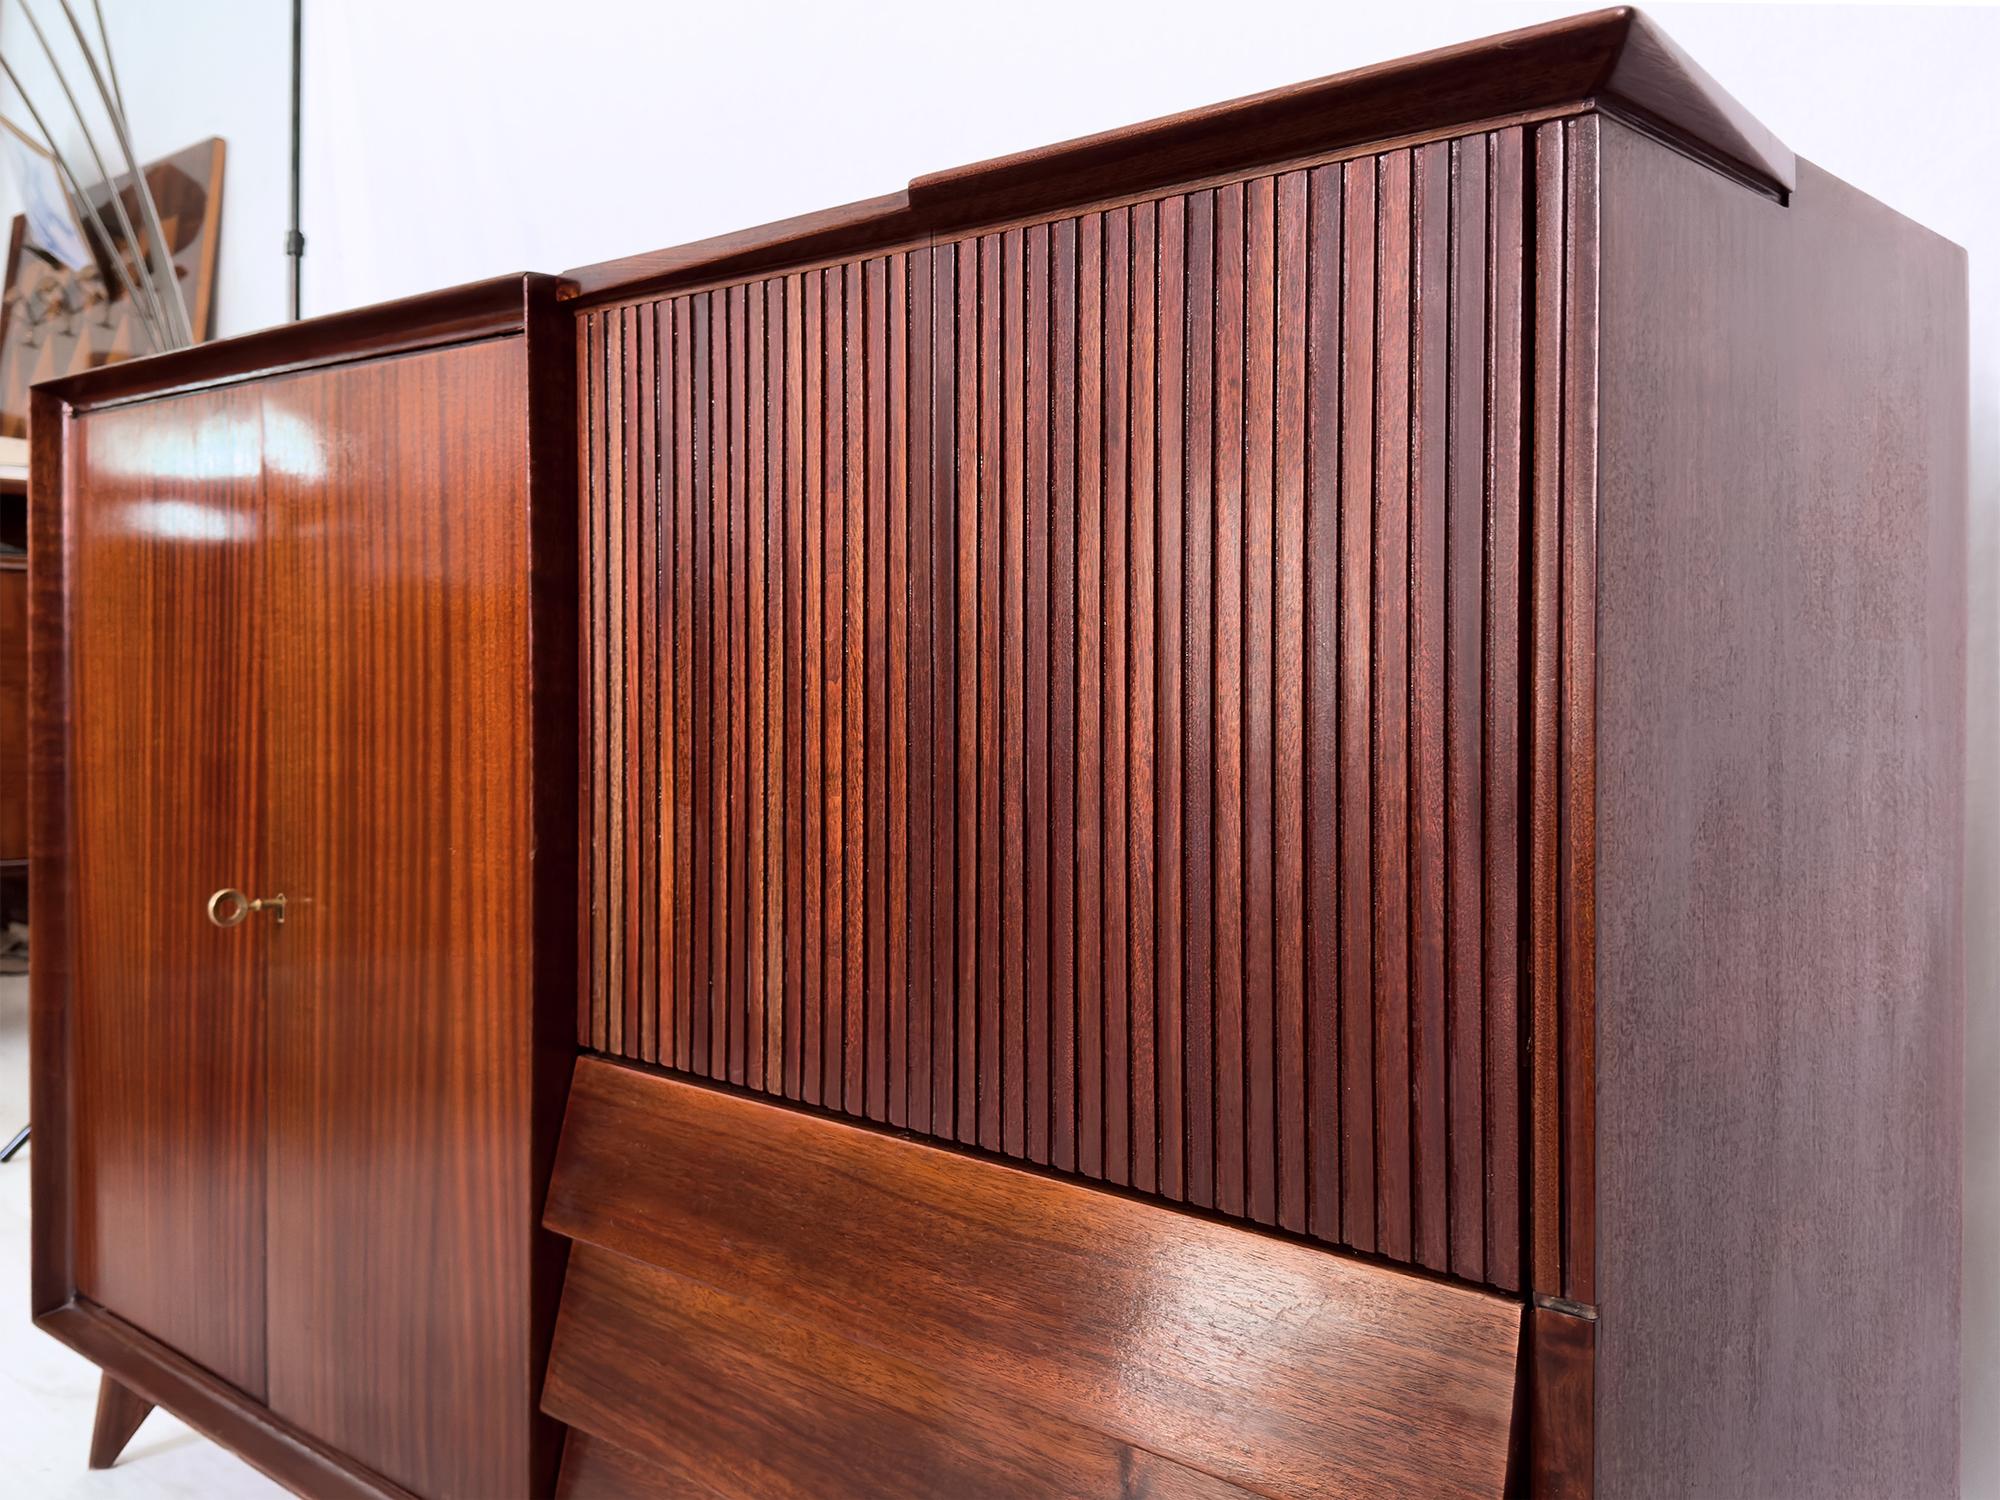 20th Century Italian Mid-Century Teak Wood Sideboard with Bar Cabinet by Vittorio Dassi, 1950s For Sale